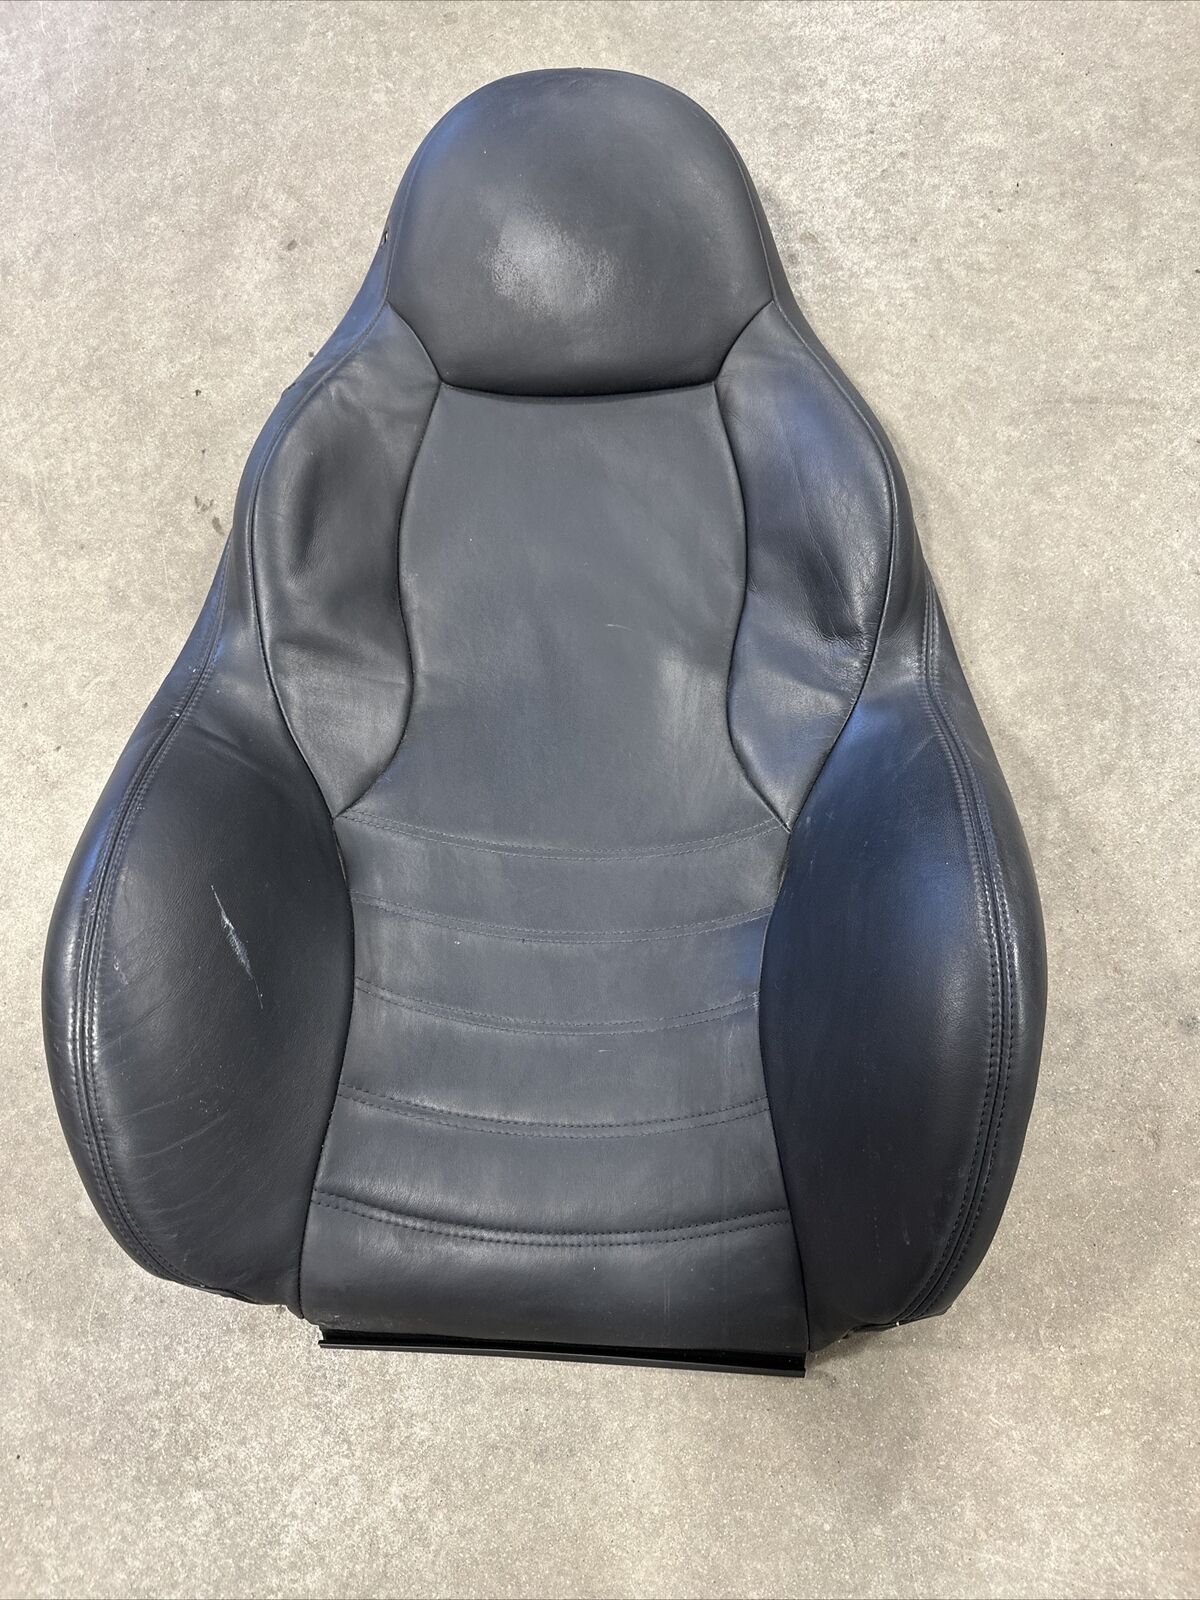 98 99 00 01 02 BMW Z3 M ROADSTER SEAT RIGHT UPPER COVER 52102693074 B151053